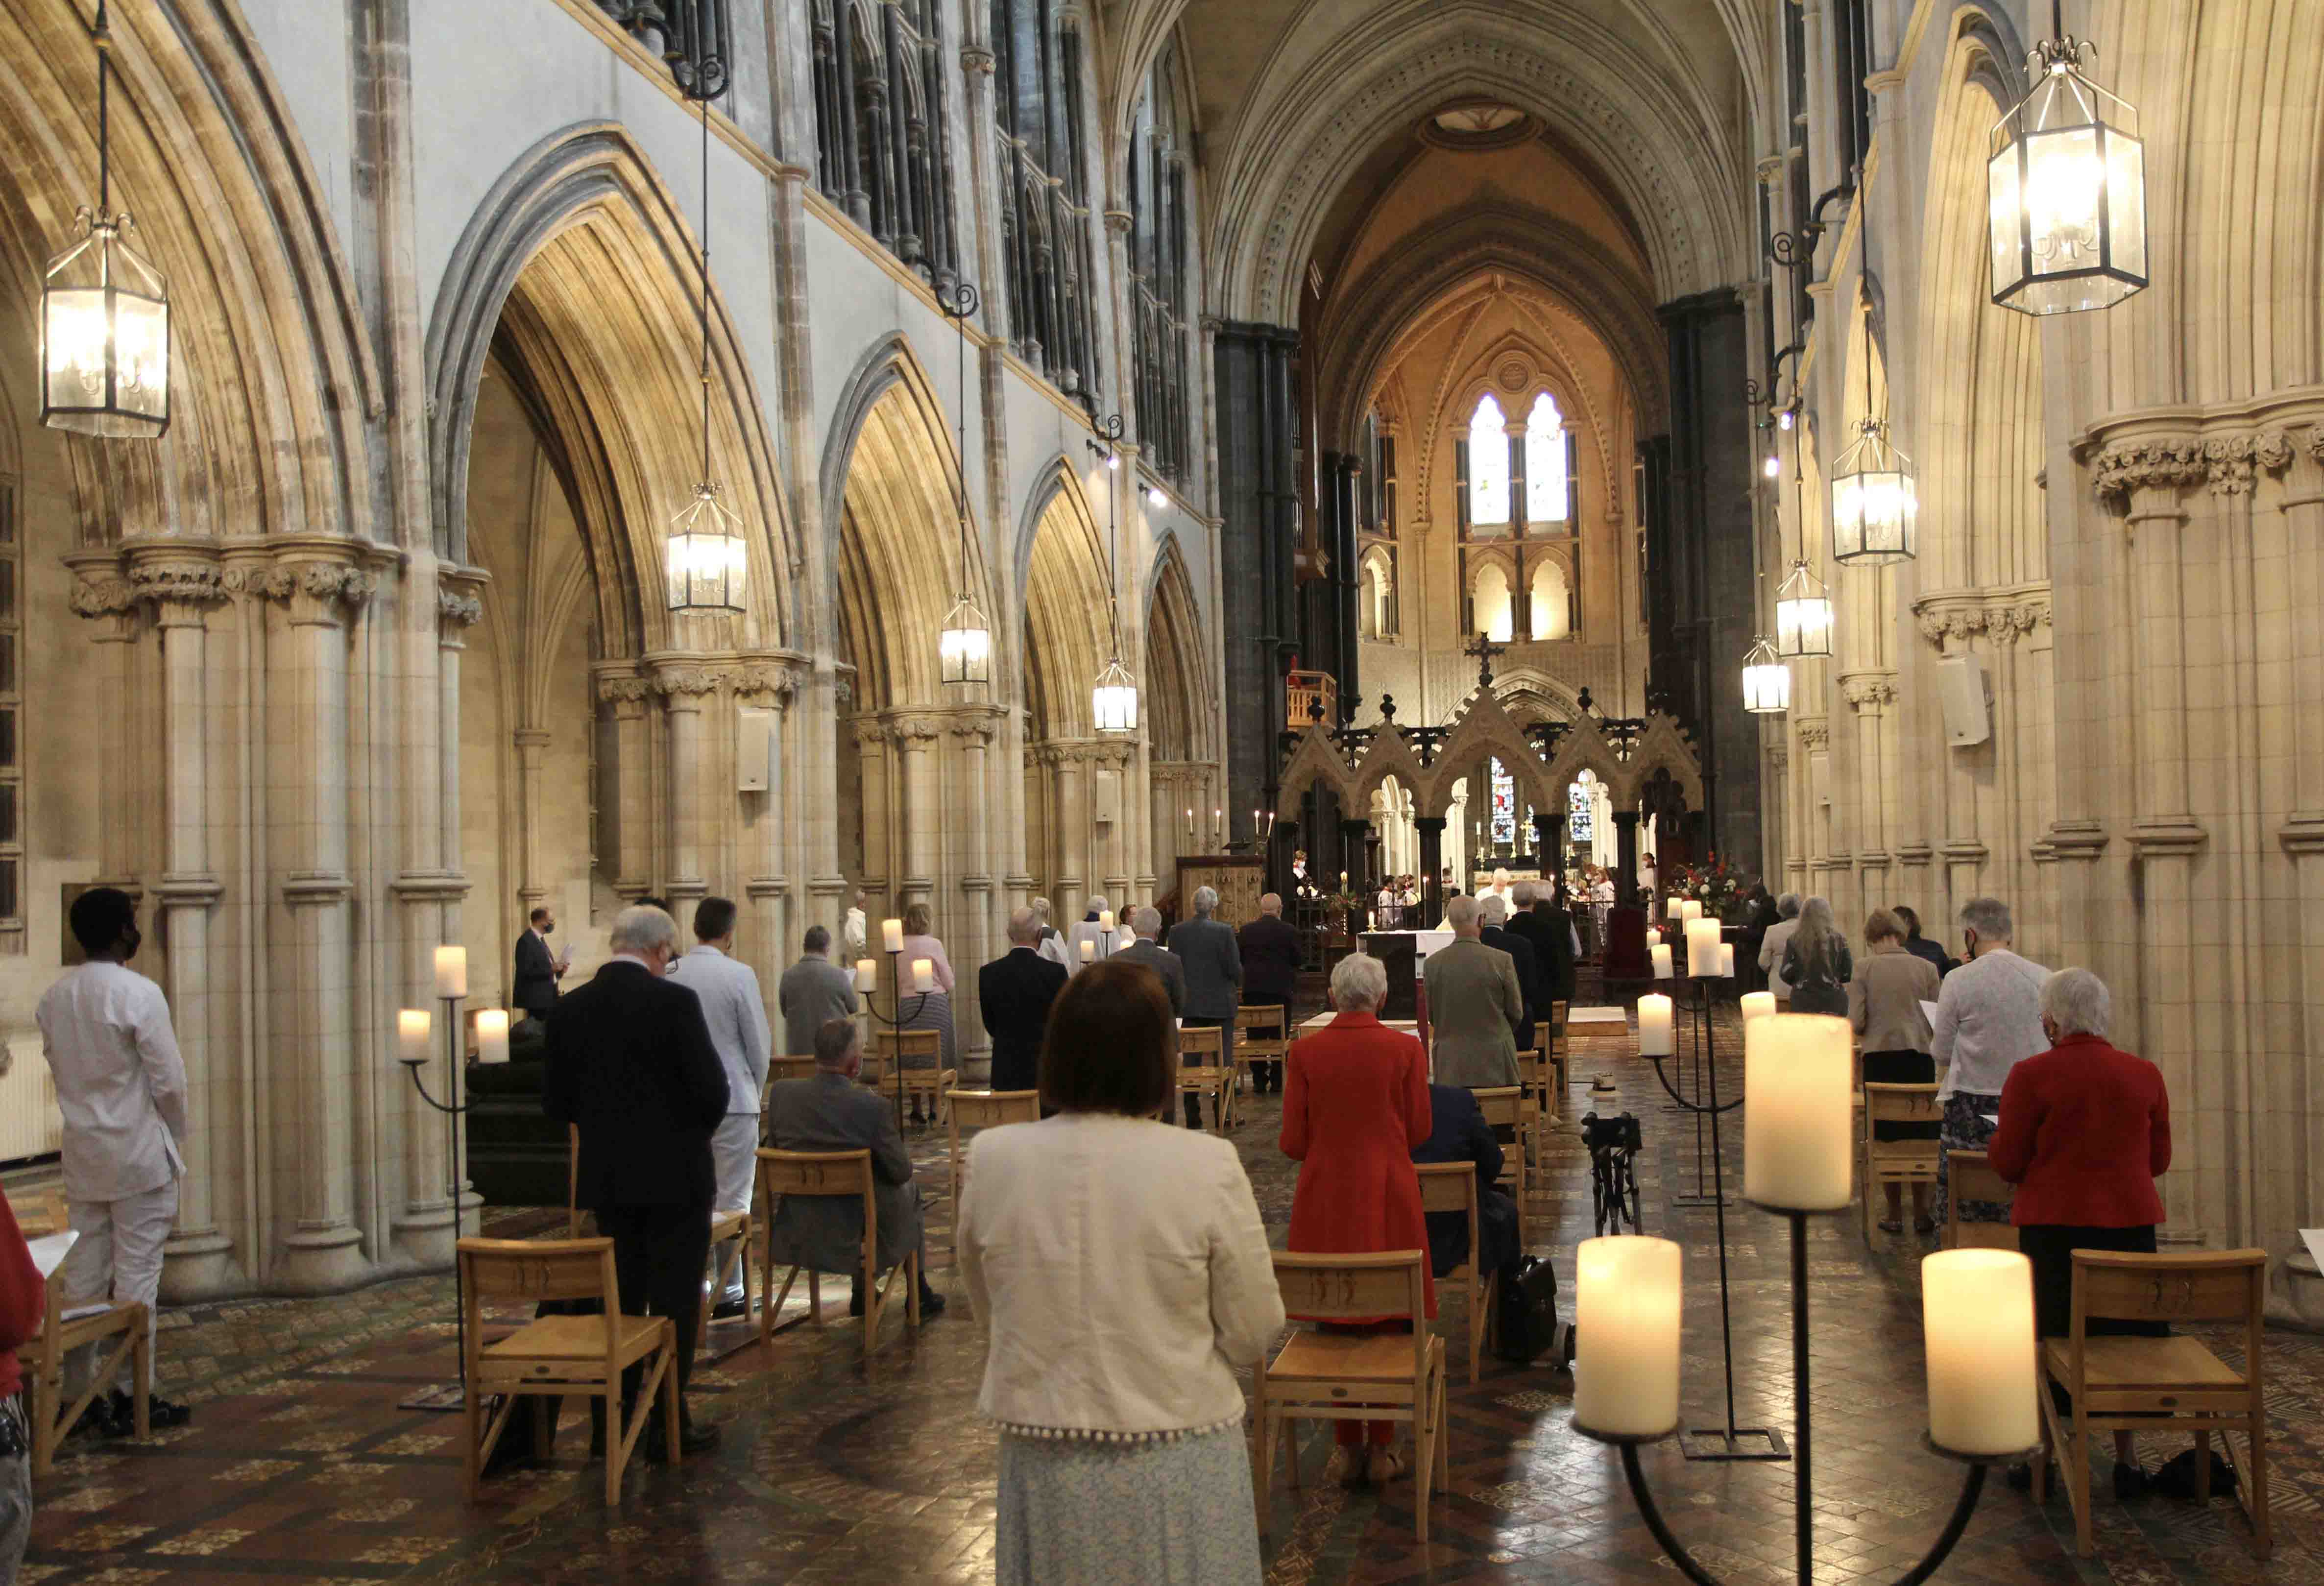 The congregation in Christ Church Cathedral, Dublin, for its Patronal Festival on Trinity Sunday.